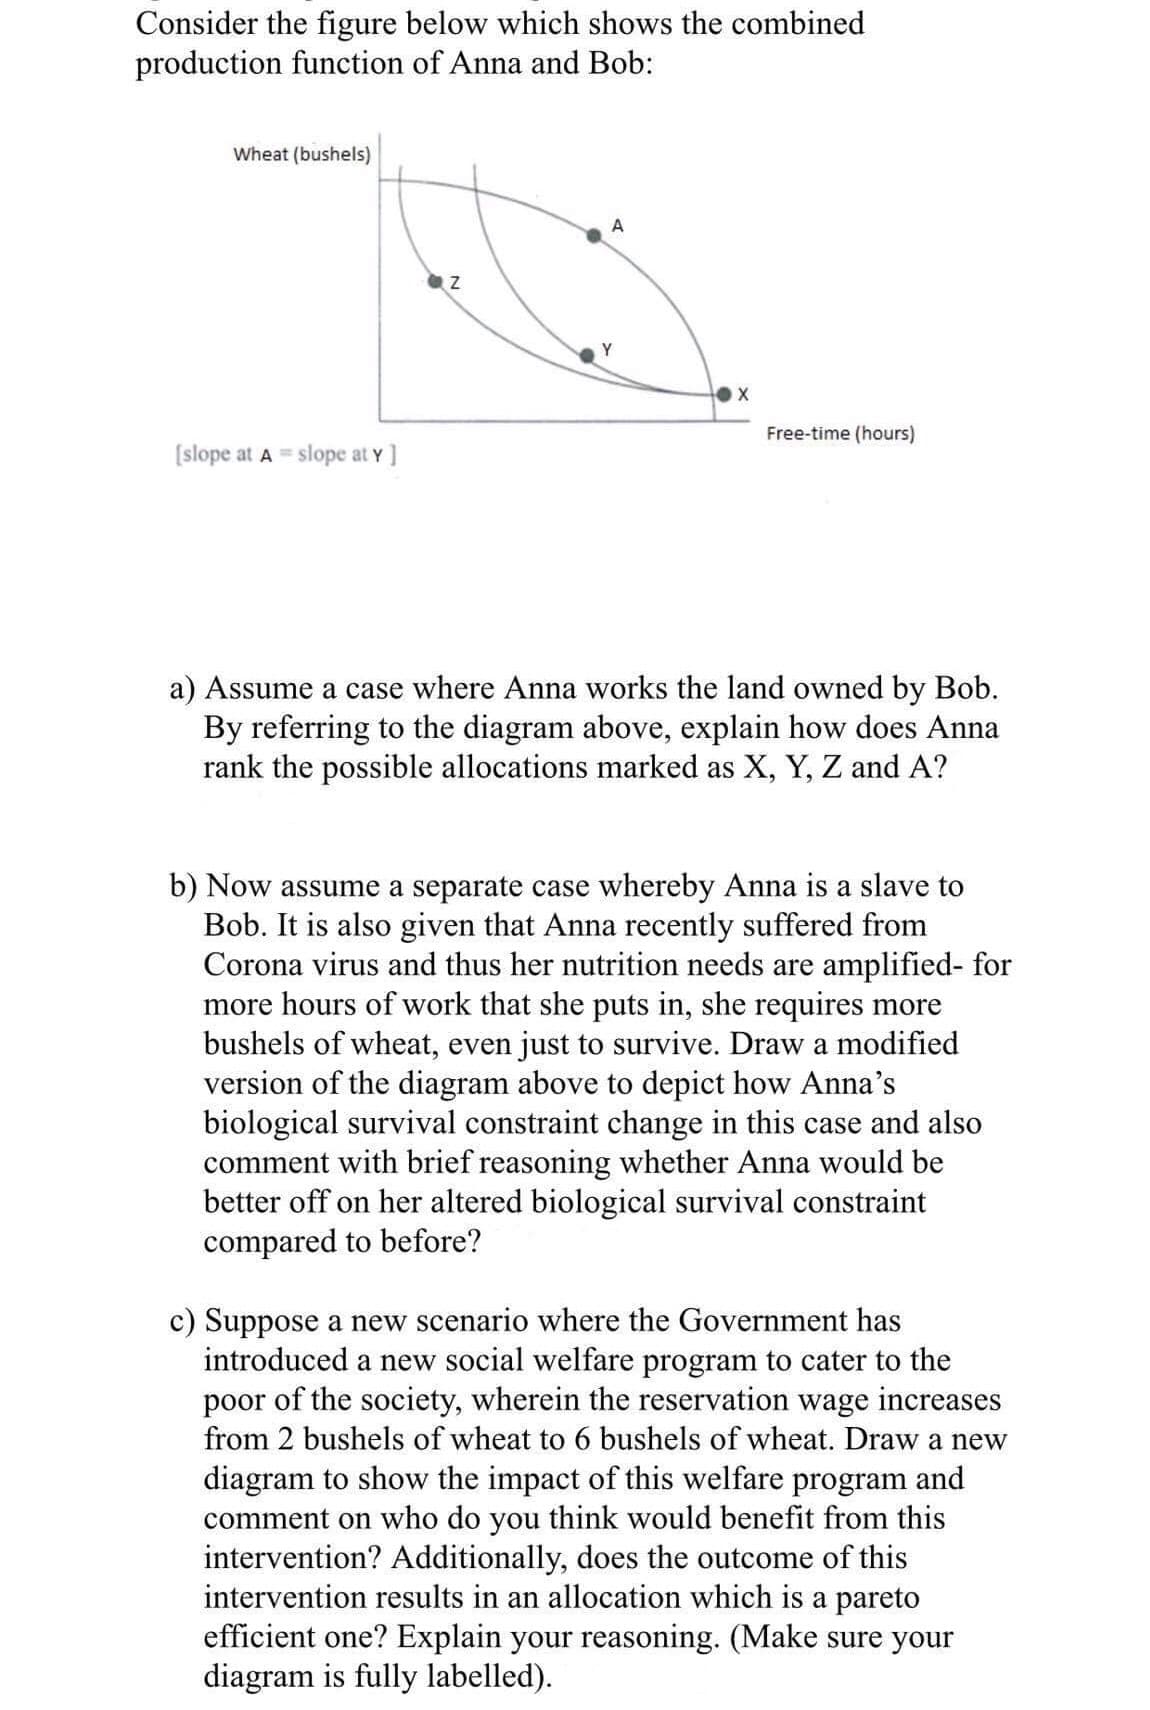 Consider the figure below which shows the combined
production function of Anna and Bob:
Wheat (bushels)
A
Y
Free-time (hours)
[slope at A = slope at Y ]
a) Assume a case where Anna works the land owned by Bob.
By referring to the diagram above, explain how does Anna
rank the possible allocations marked as X, Y, Z and A?
b) Now assume a separate case whereby Anna is a slave to
Bob. It is also given that Anna recently suffered from
Corona virus and thus her nutrition needs are amplified- for
more hours of work that she puts in, she requires more
bushels of wheat, even just to survive. Draw a modified
version of the diagram above to depict how Anna's
biological survival constraint change in this case and also
comment with brief reasoning whether Anna would be
better off on her altered biological survival constraint
compared to before?
c) Suppose a new scenario where the Government has
introduced a new social welfare program to cater to the
poor of the society, wherein the reservation wage increases
from 2 bushels of wheat to 6 bushels of wheat. Draw a new
diagram to show the impact of this welfare program and
comment on who do you think would benefit from this
intervention? Additionally, does the outcome of this
intervention results in an allocation which is a pareto
efficient one? Explain your reasoning. (Make sure your
diagram is fully labelled).
